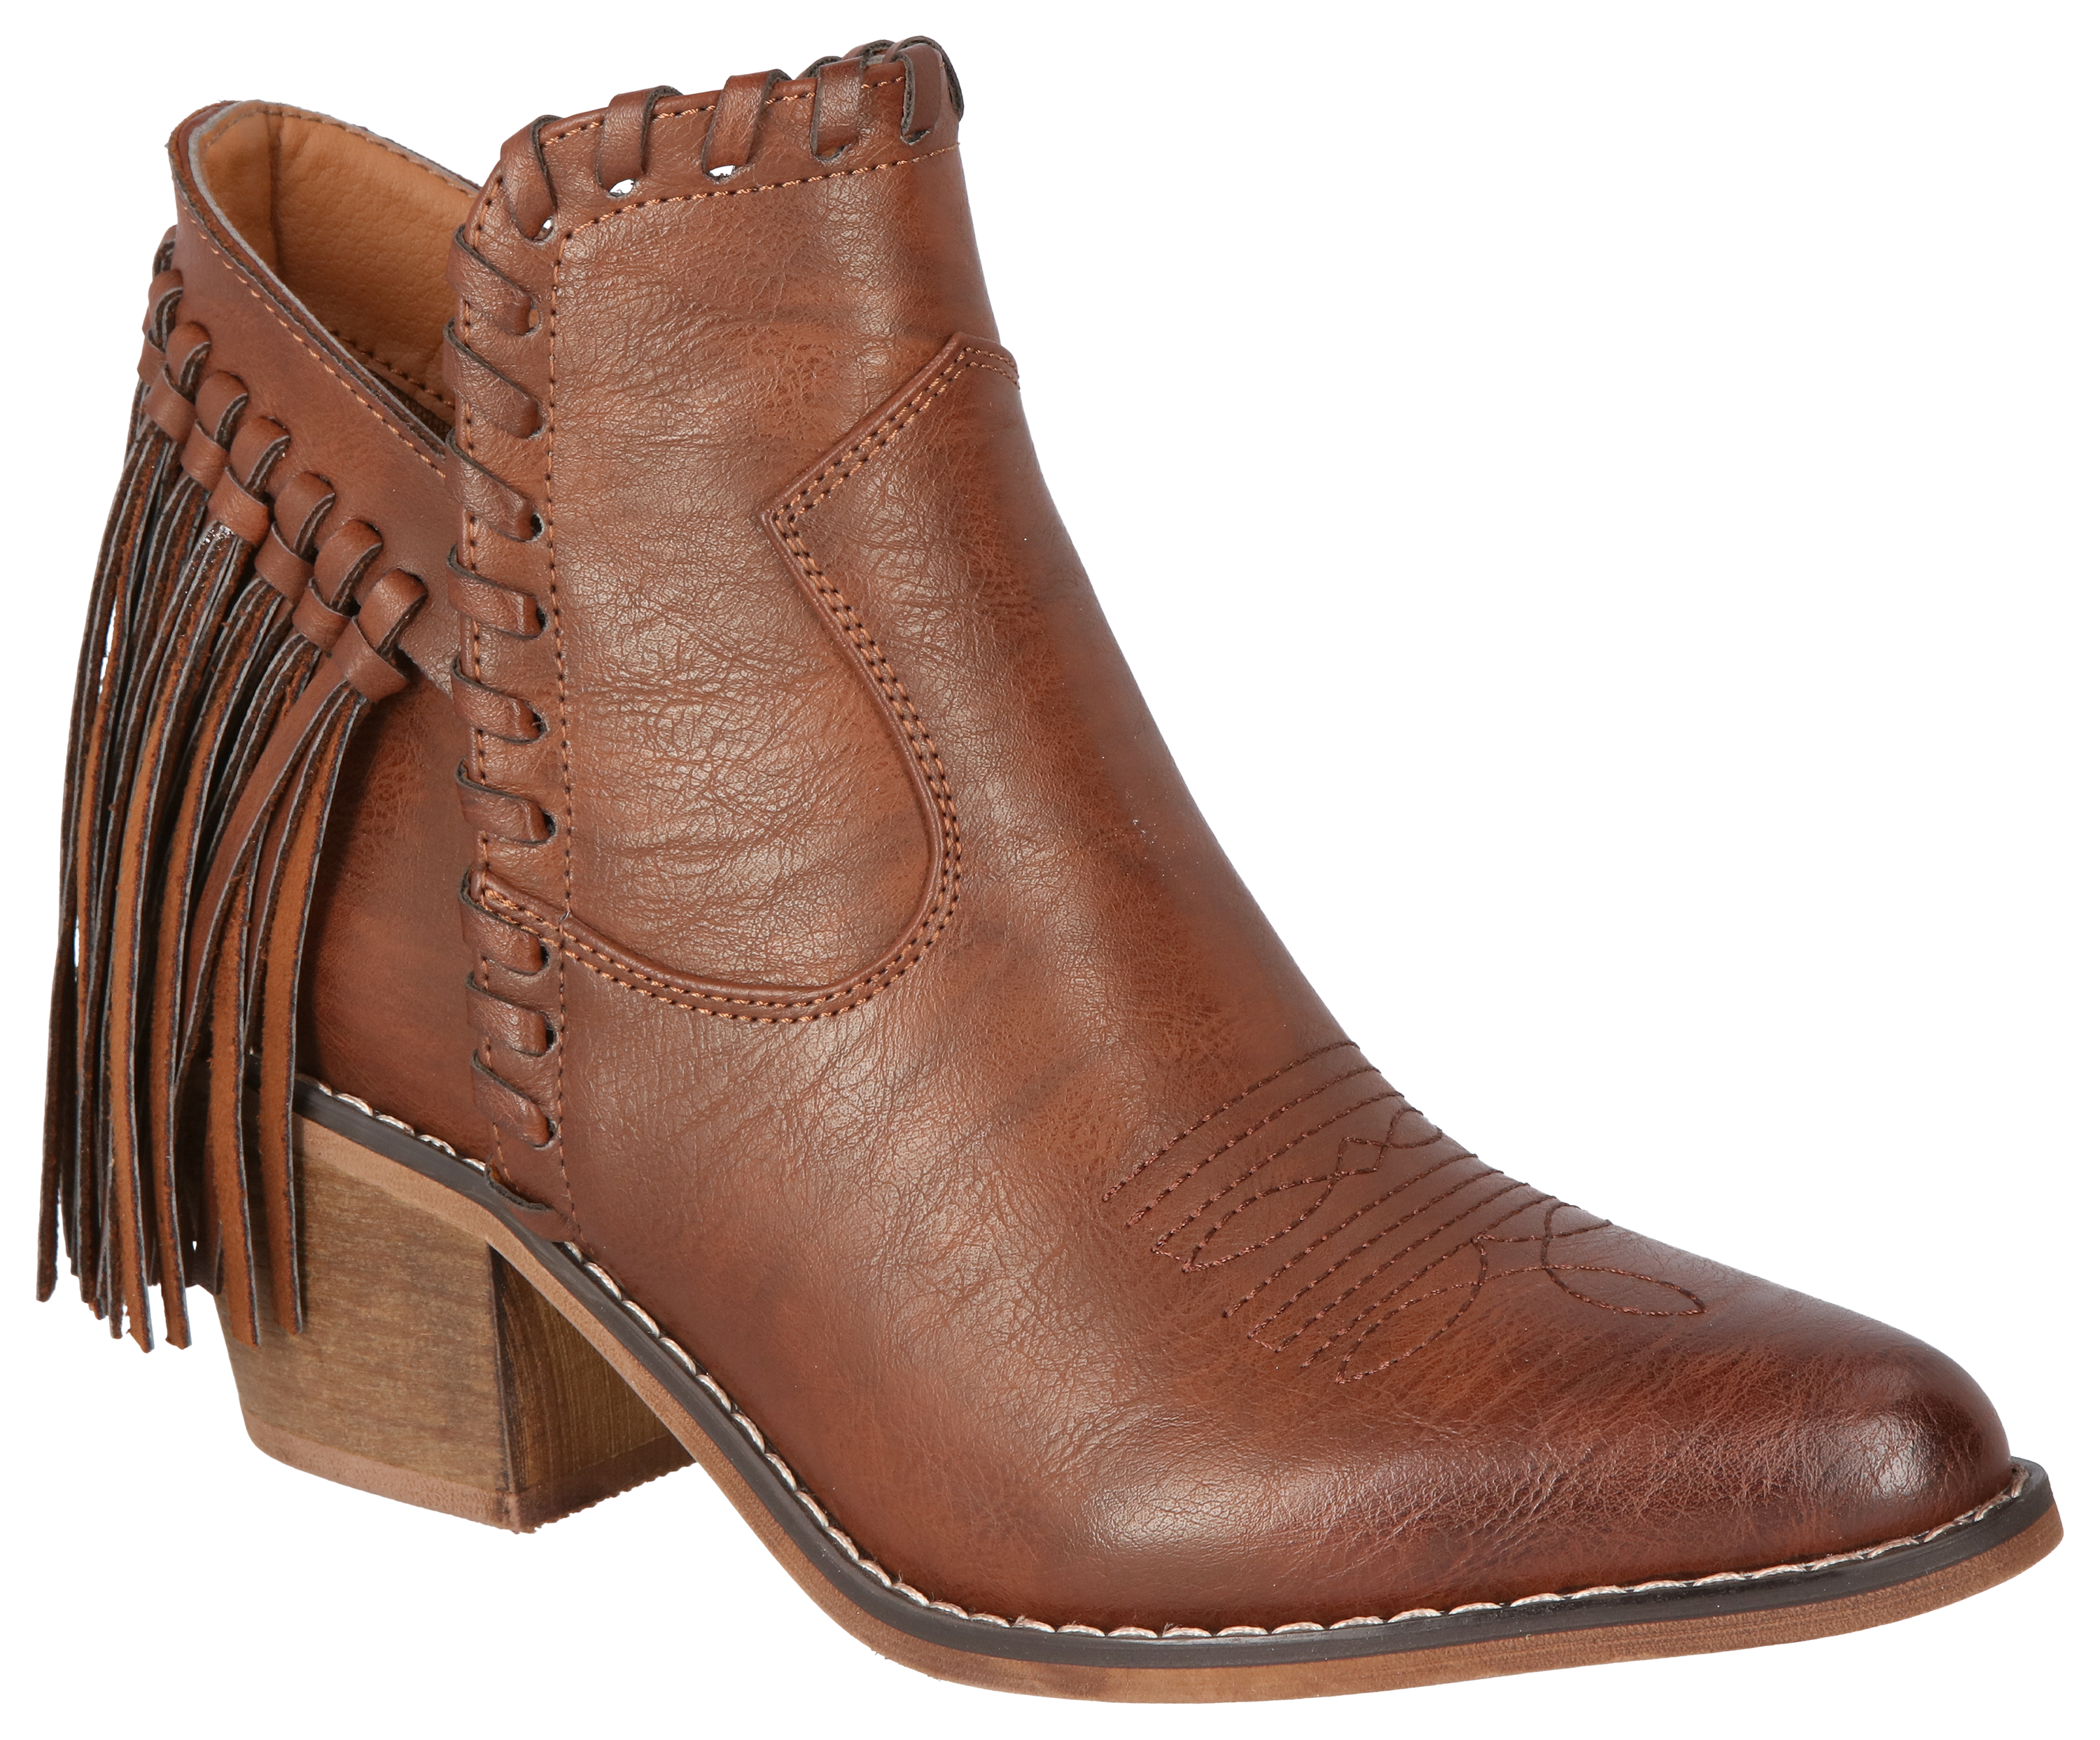 Natural Reflections Keykee Tassel Boots for Ladies - Whiskey - 8.5M